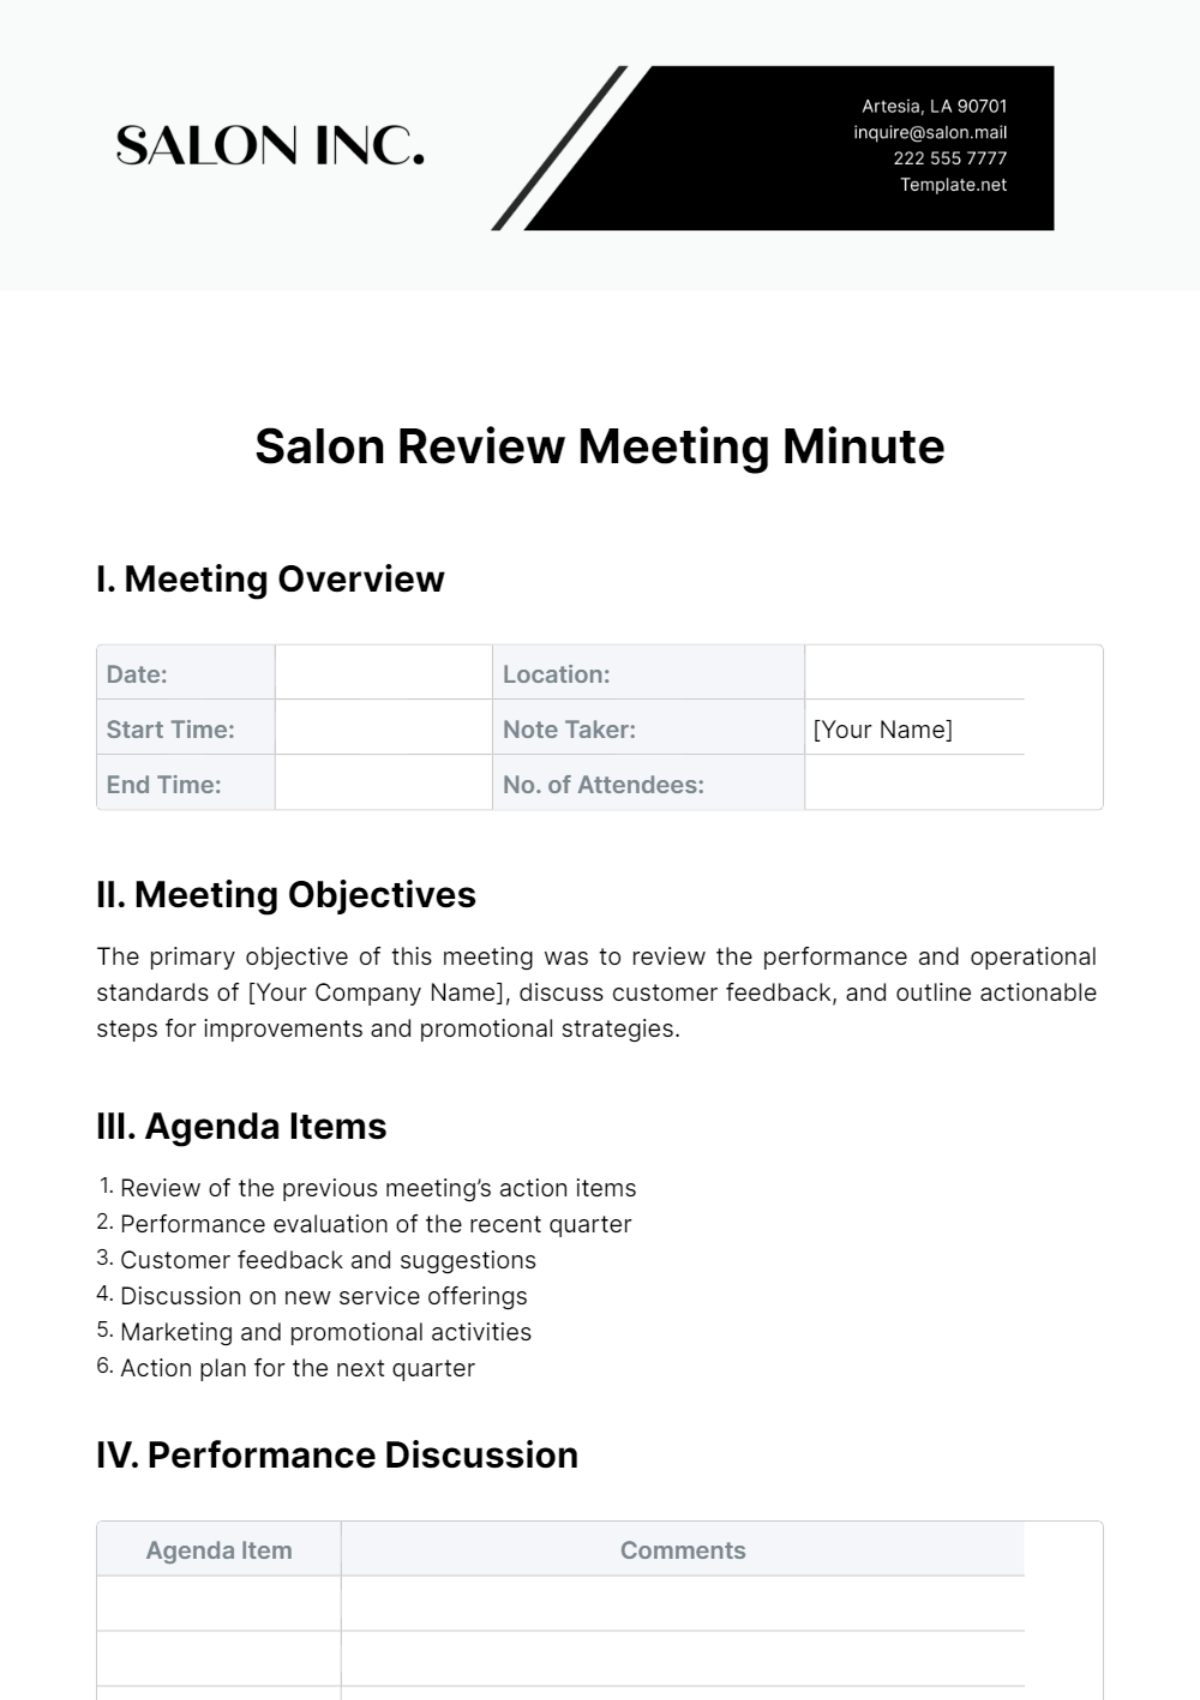 Salon Review Meeting Minute Template